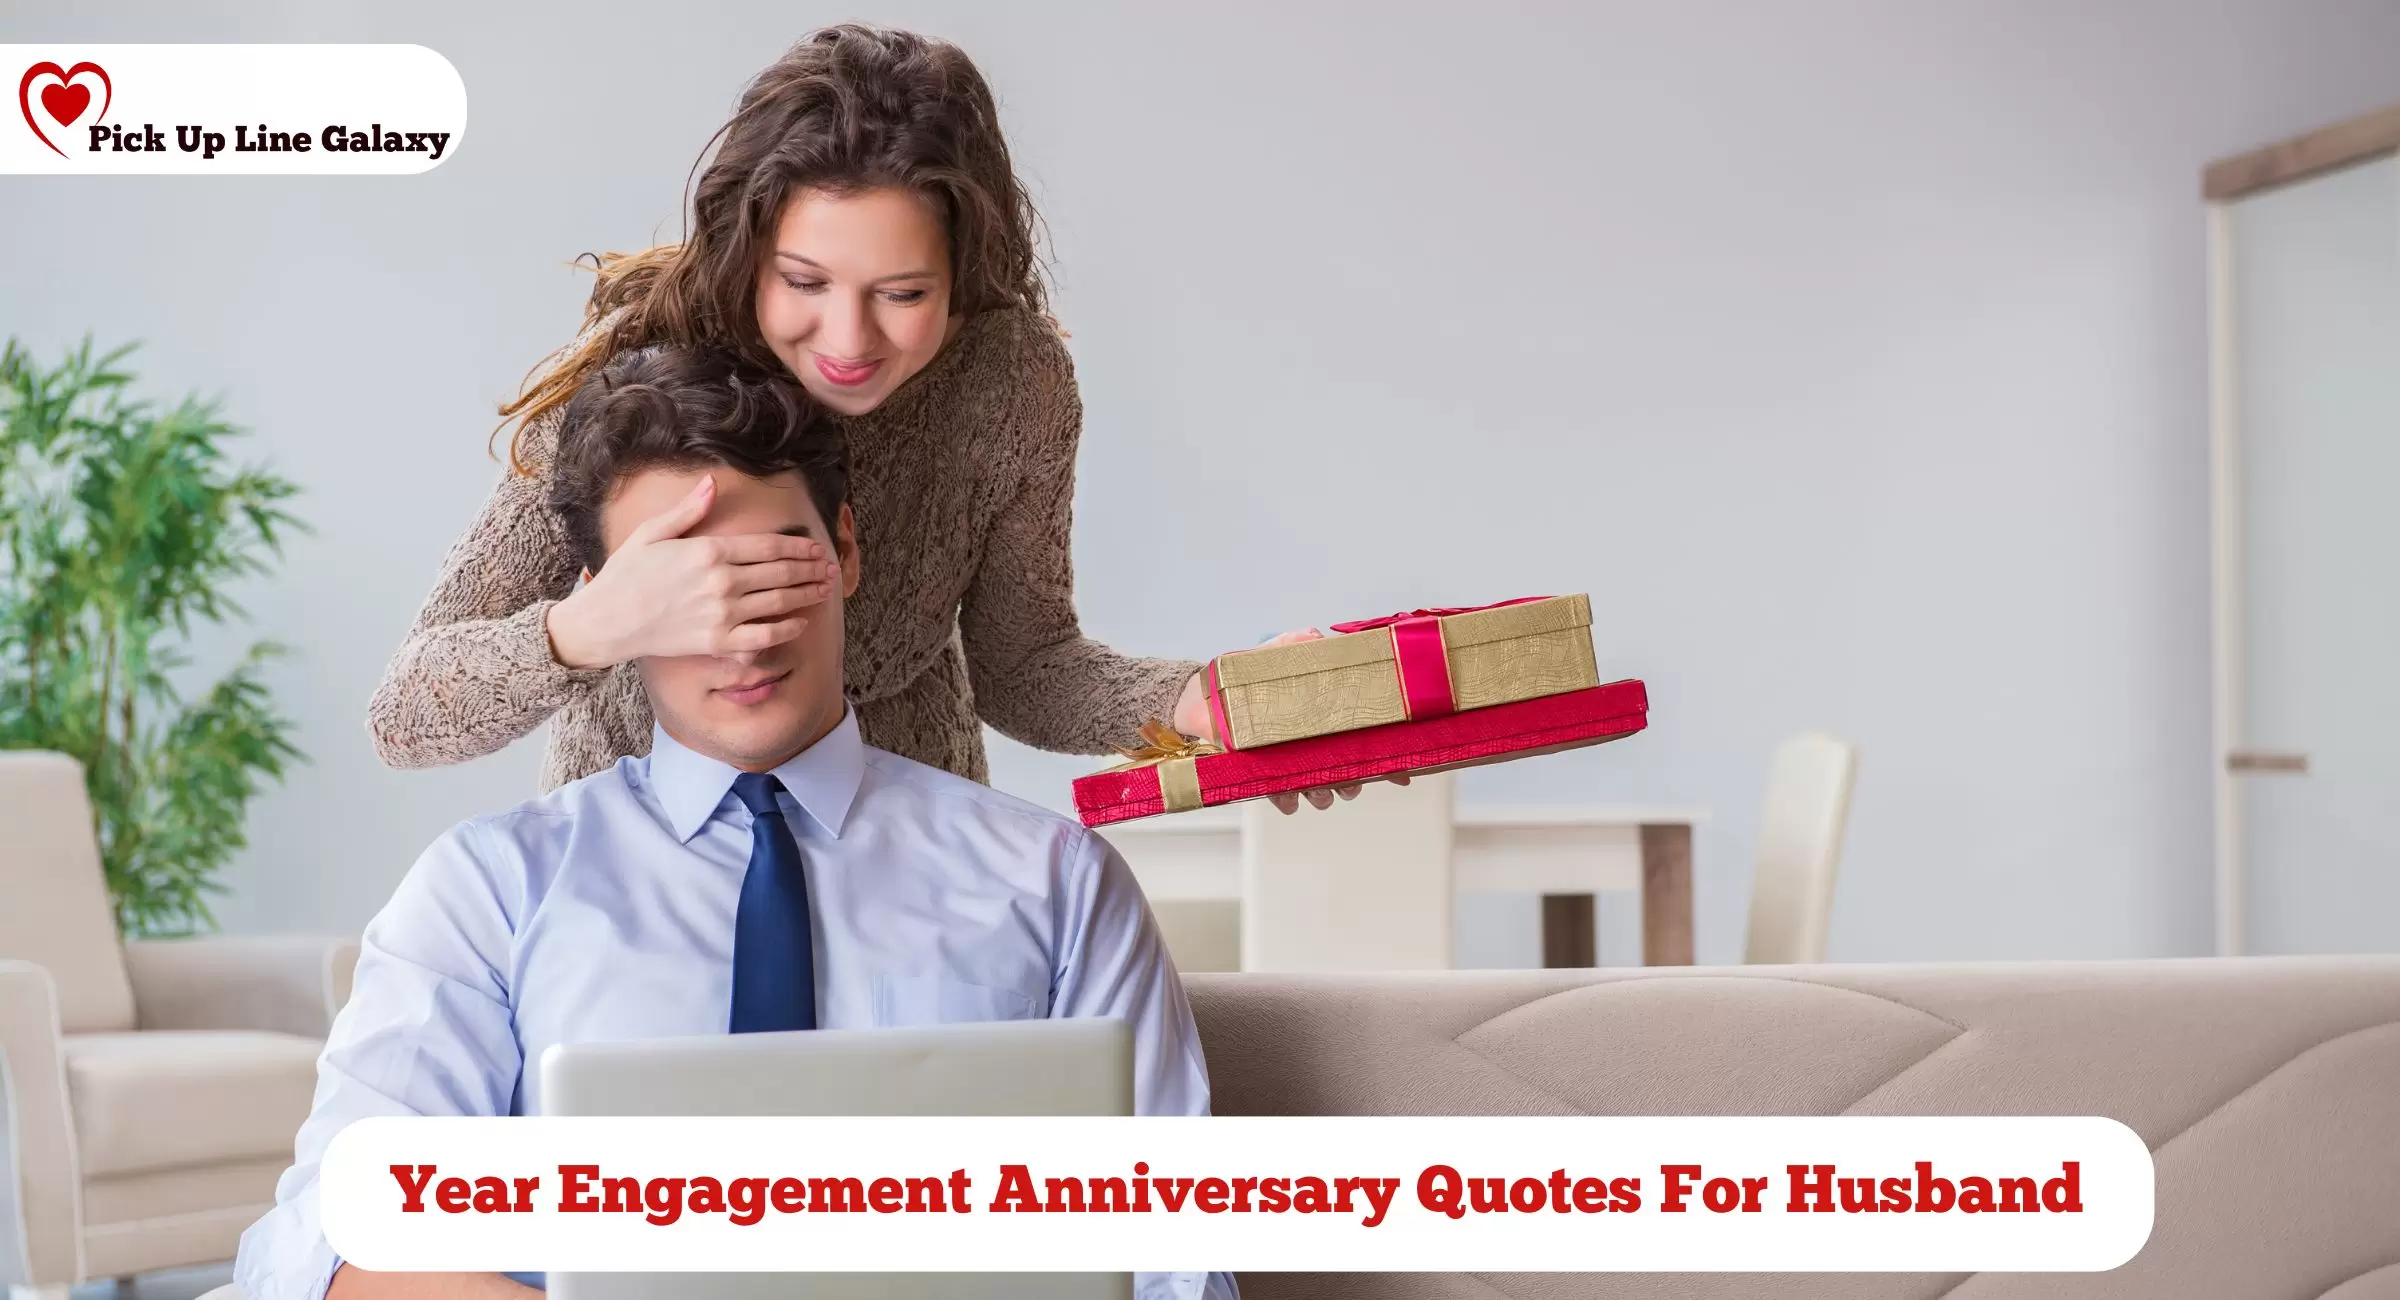 Year Engagement Anniversary Quotes For Husband